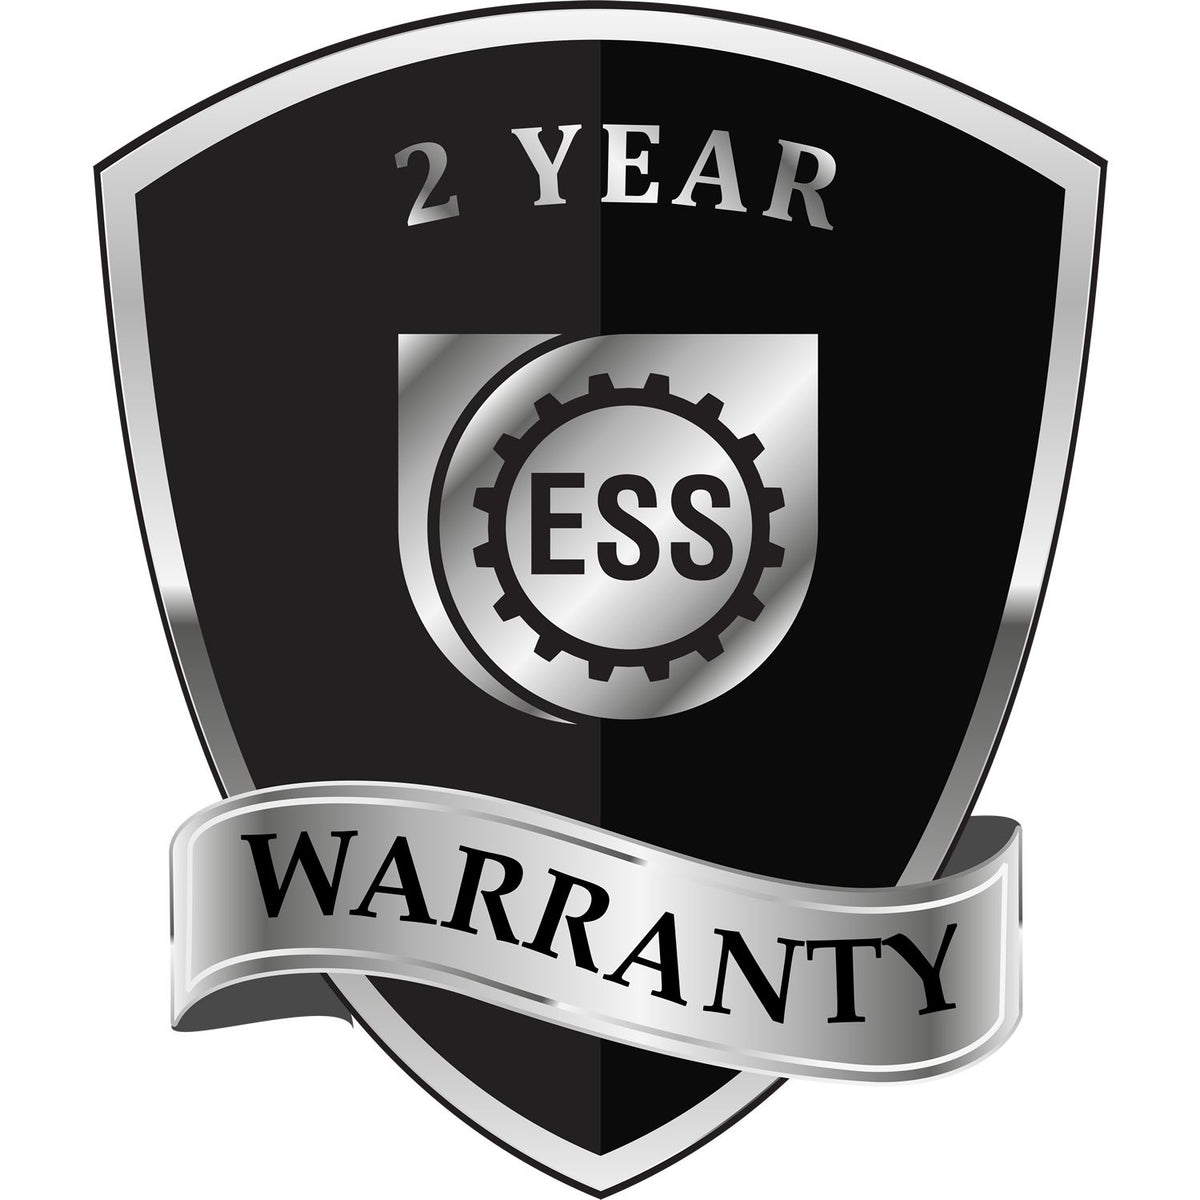 A badge or emblem showing a warranty icon for the Heavy Duty Cast Iron Vermont Engineer Seal Embosser